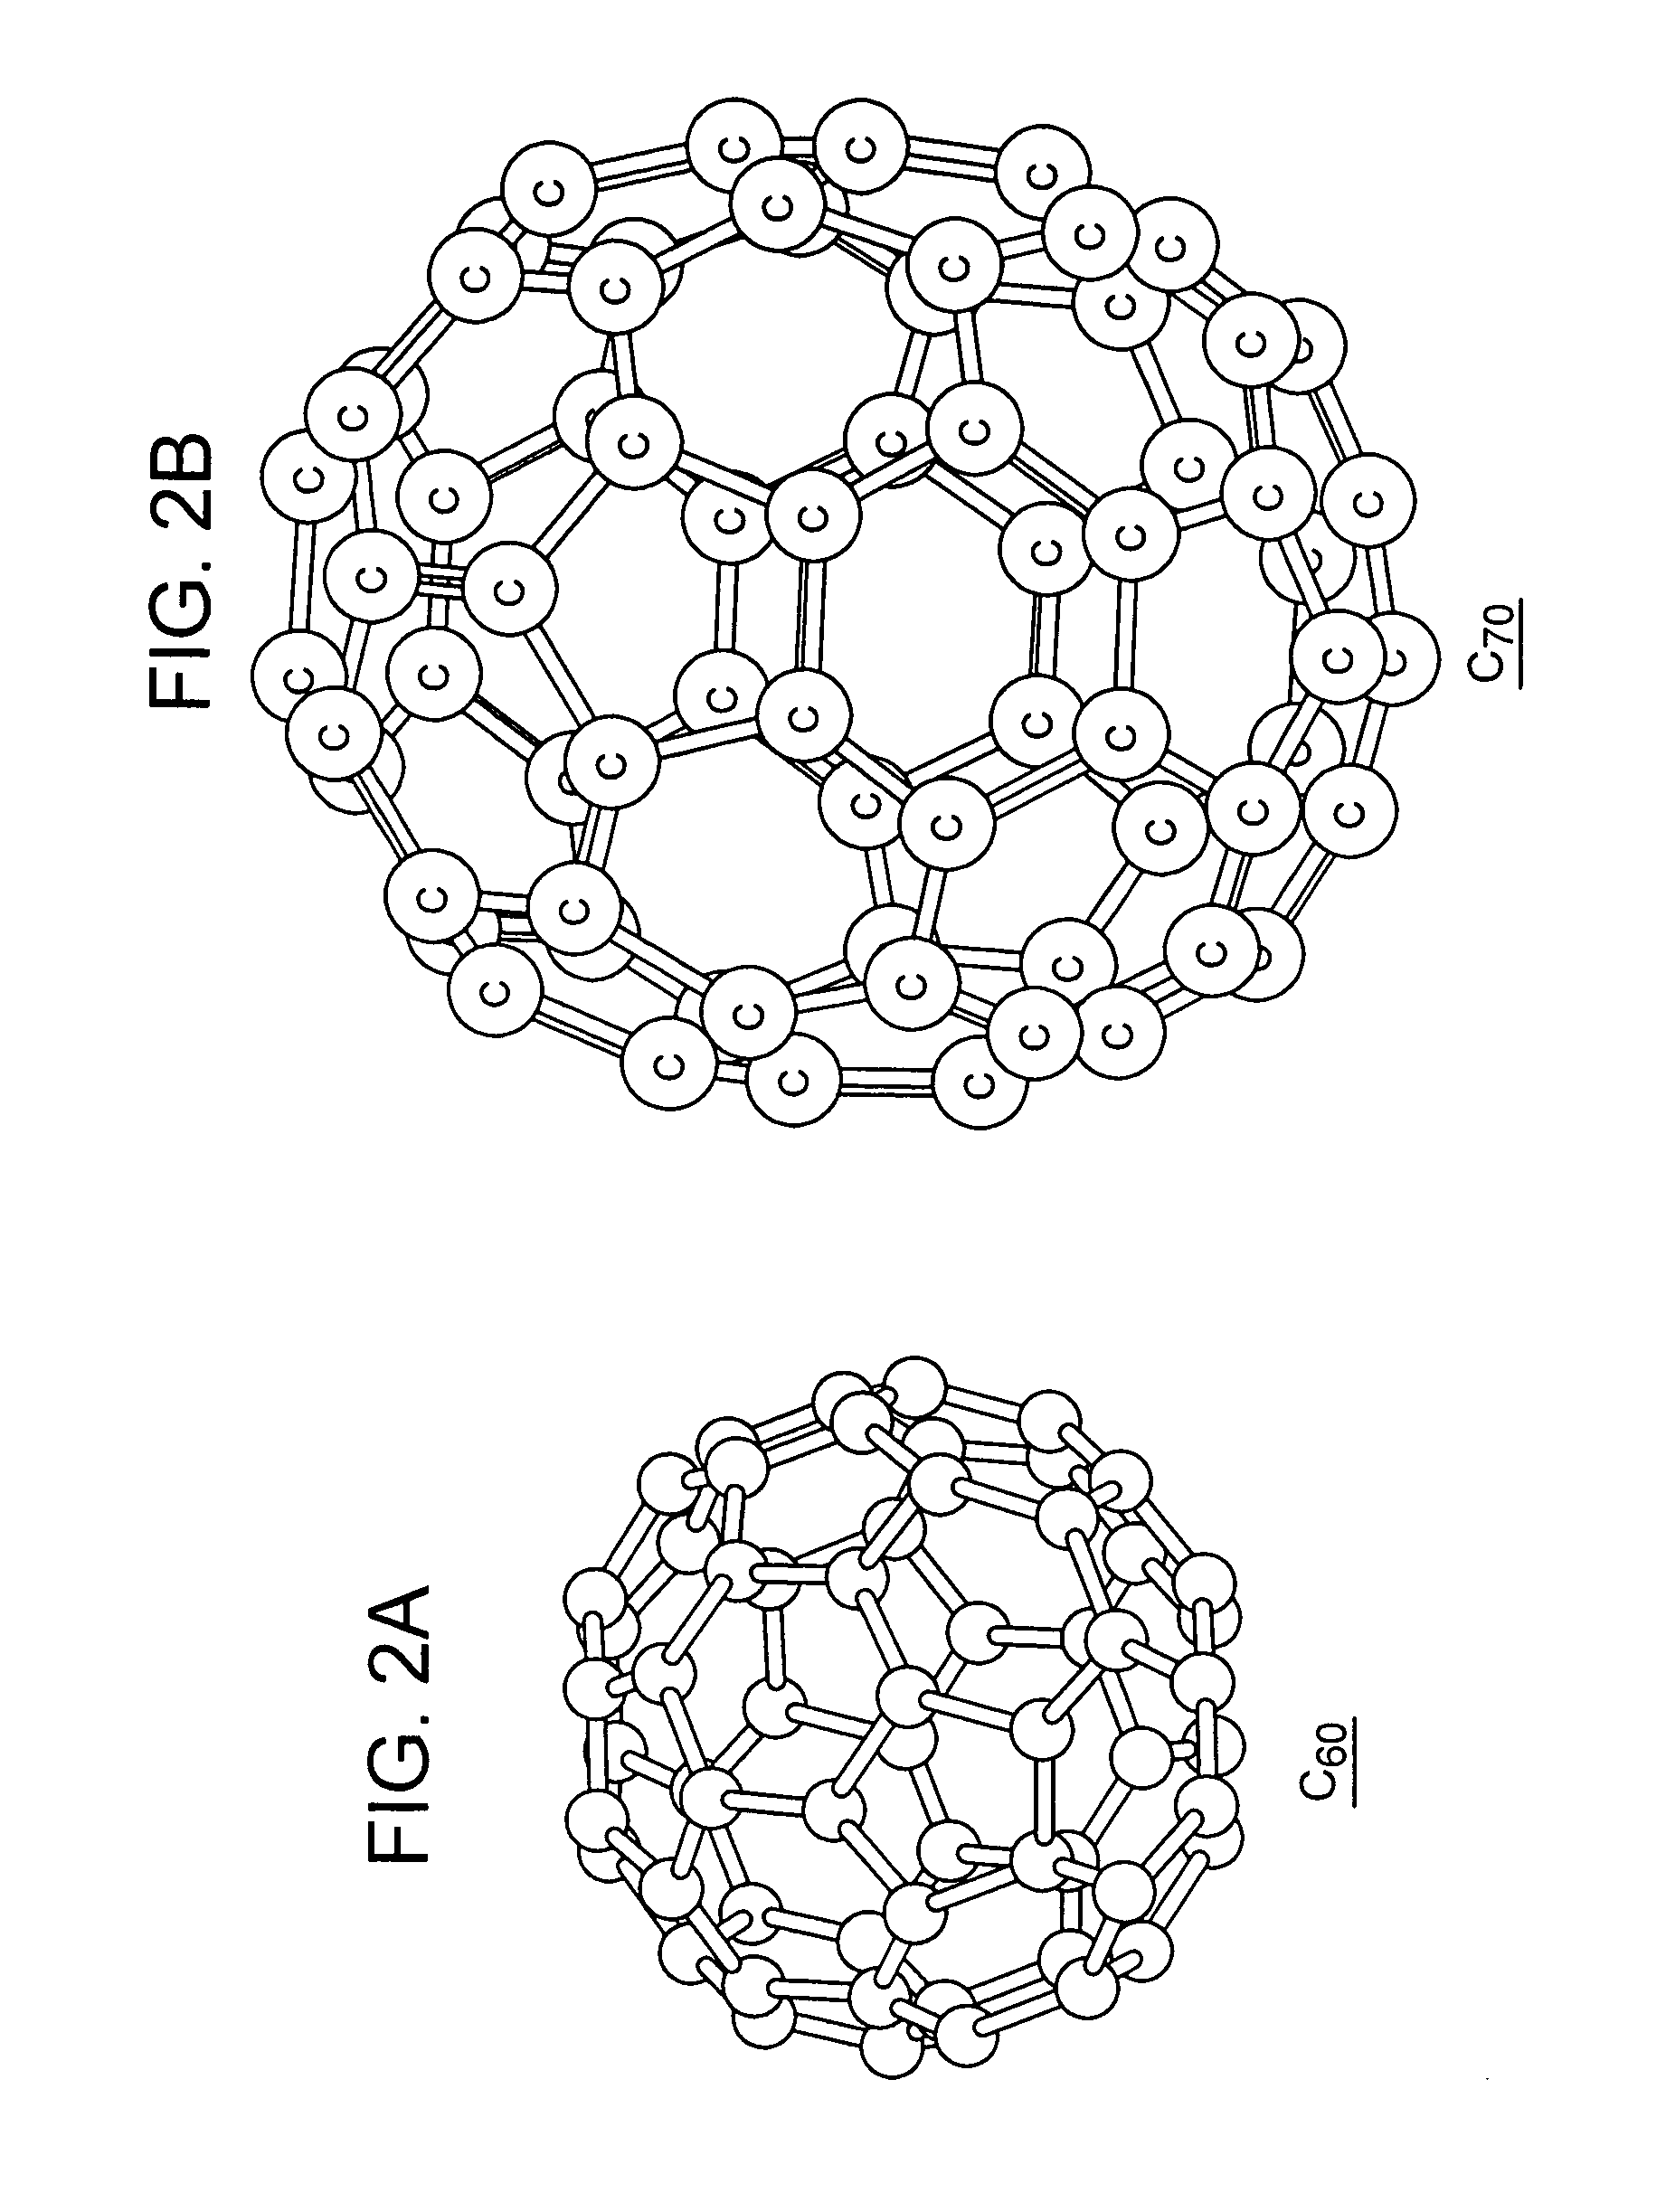 Ionic conductor, method of manufacturing the same, and electrochemical device